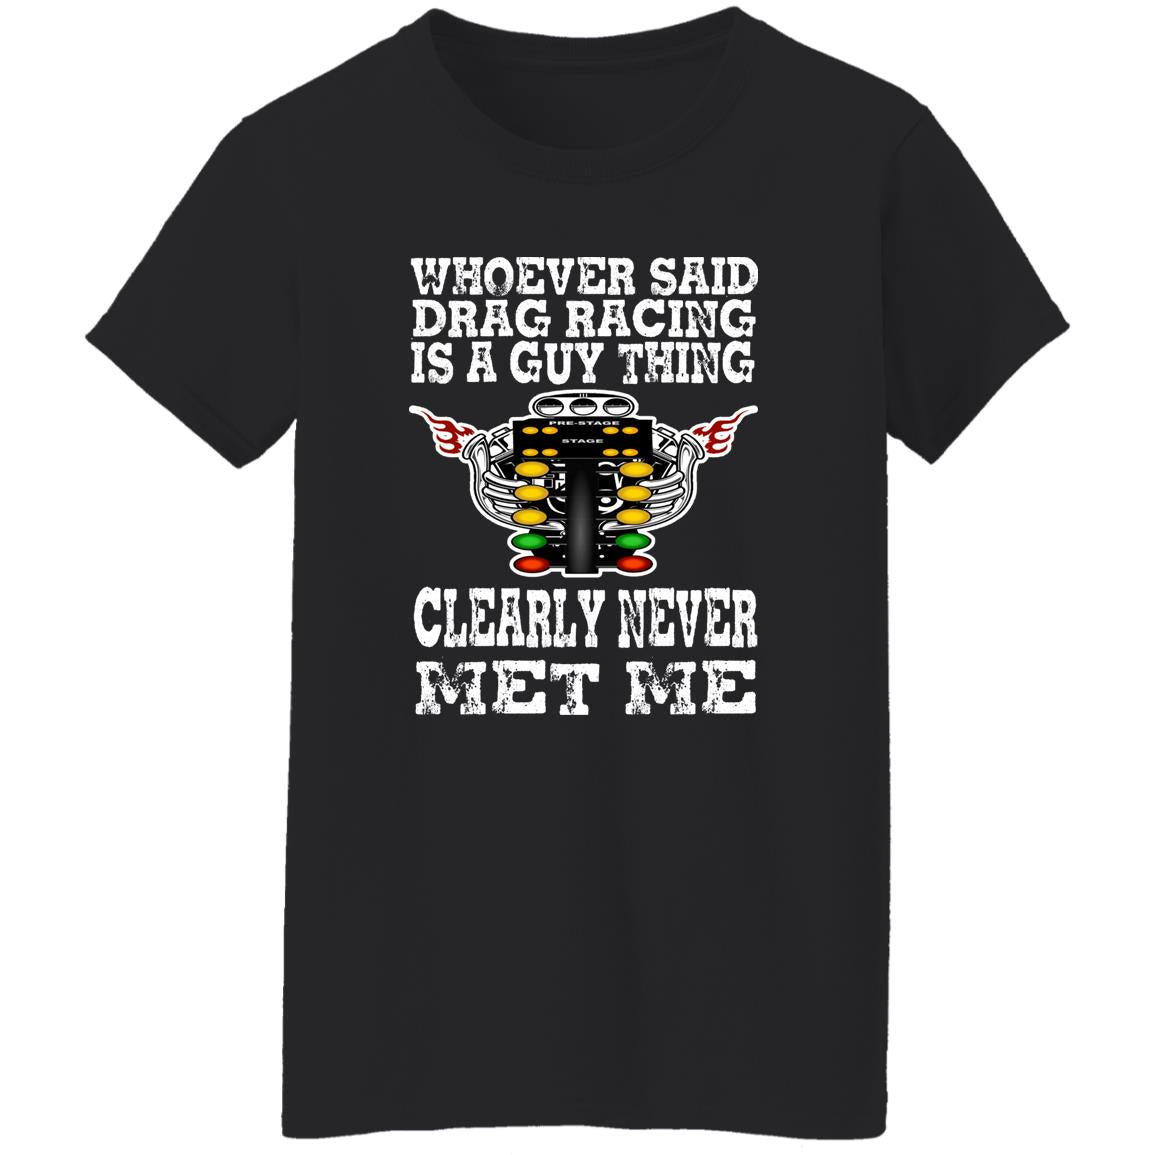 Whoever Said Drag Racing Is A Guy Thing Ladies' 5.3 oz. T-Shirt